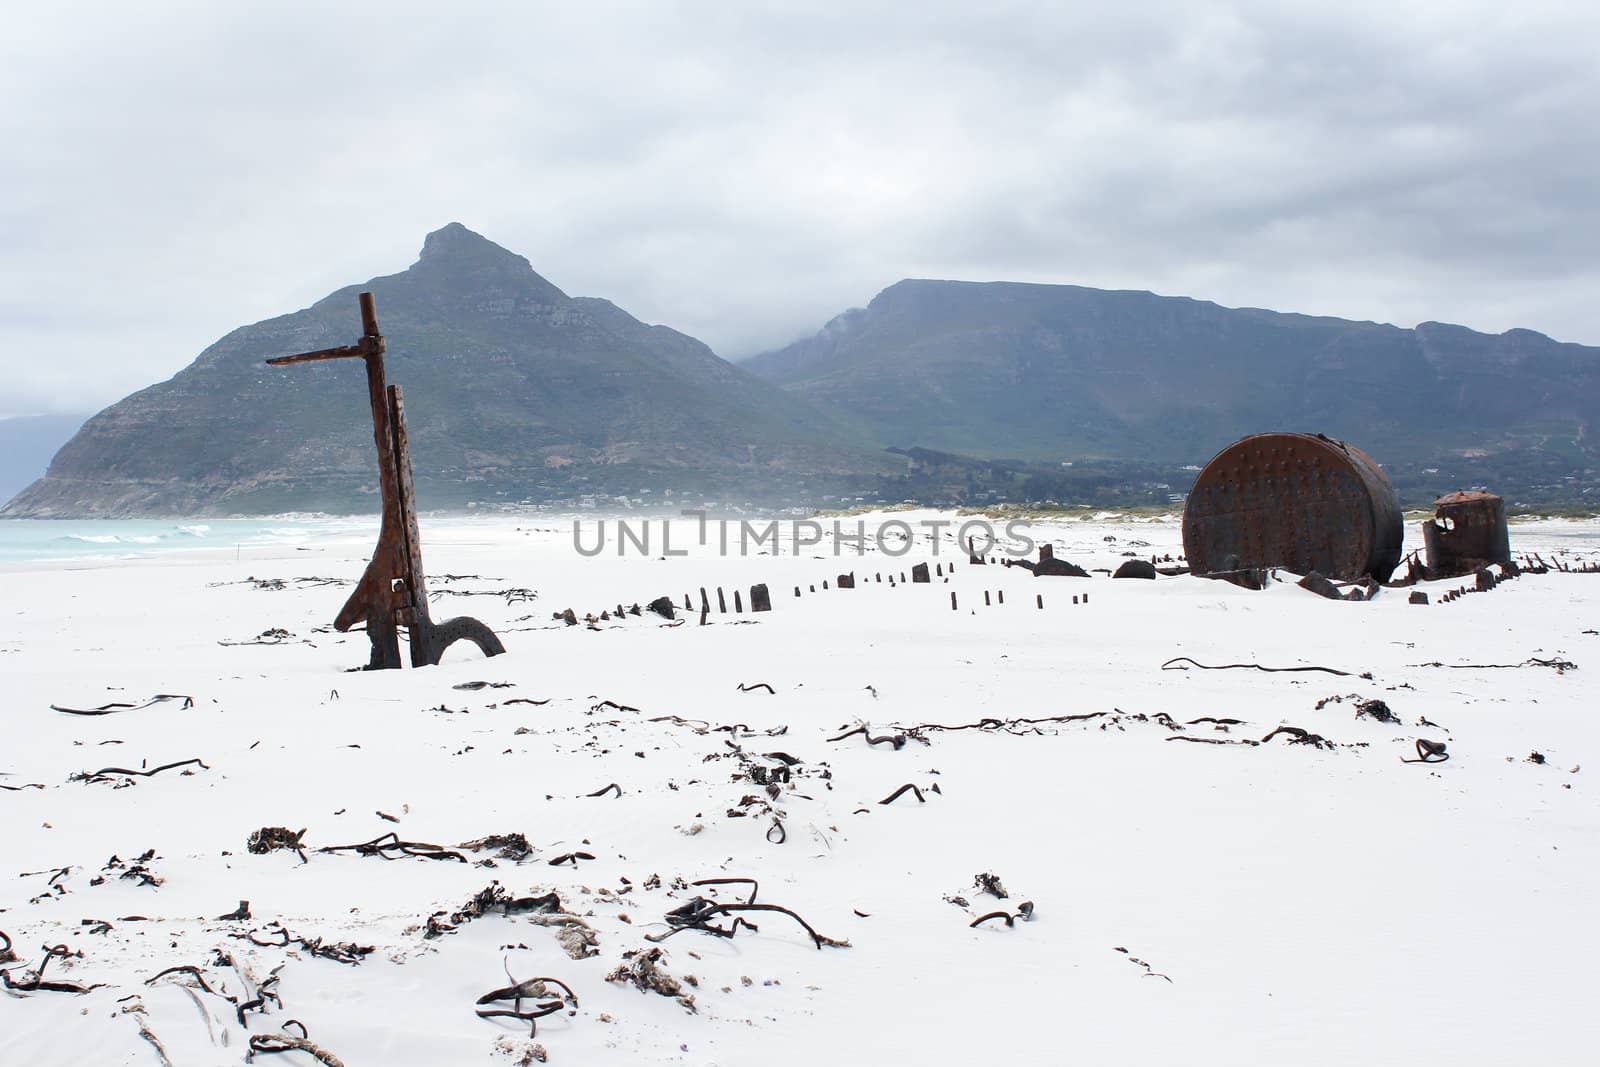 Shipwreck Kakapo at the beach of kommetjie with upcoming storm in the background